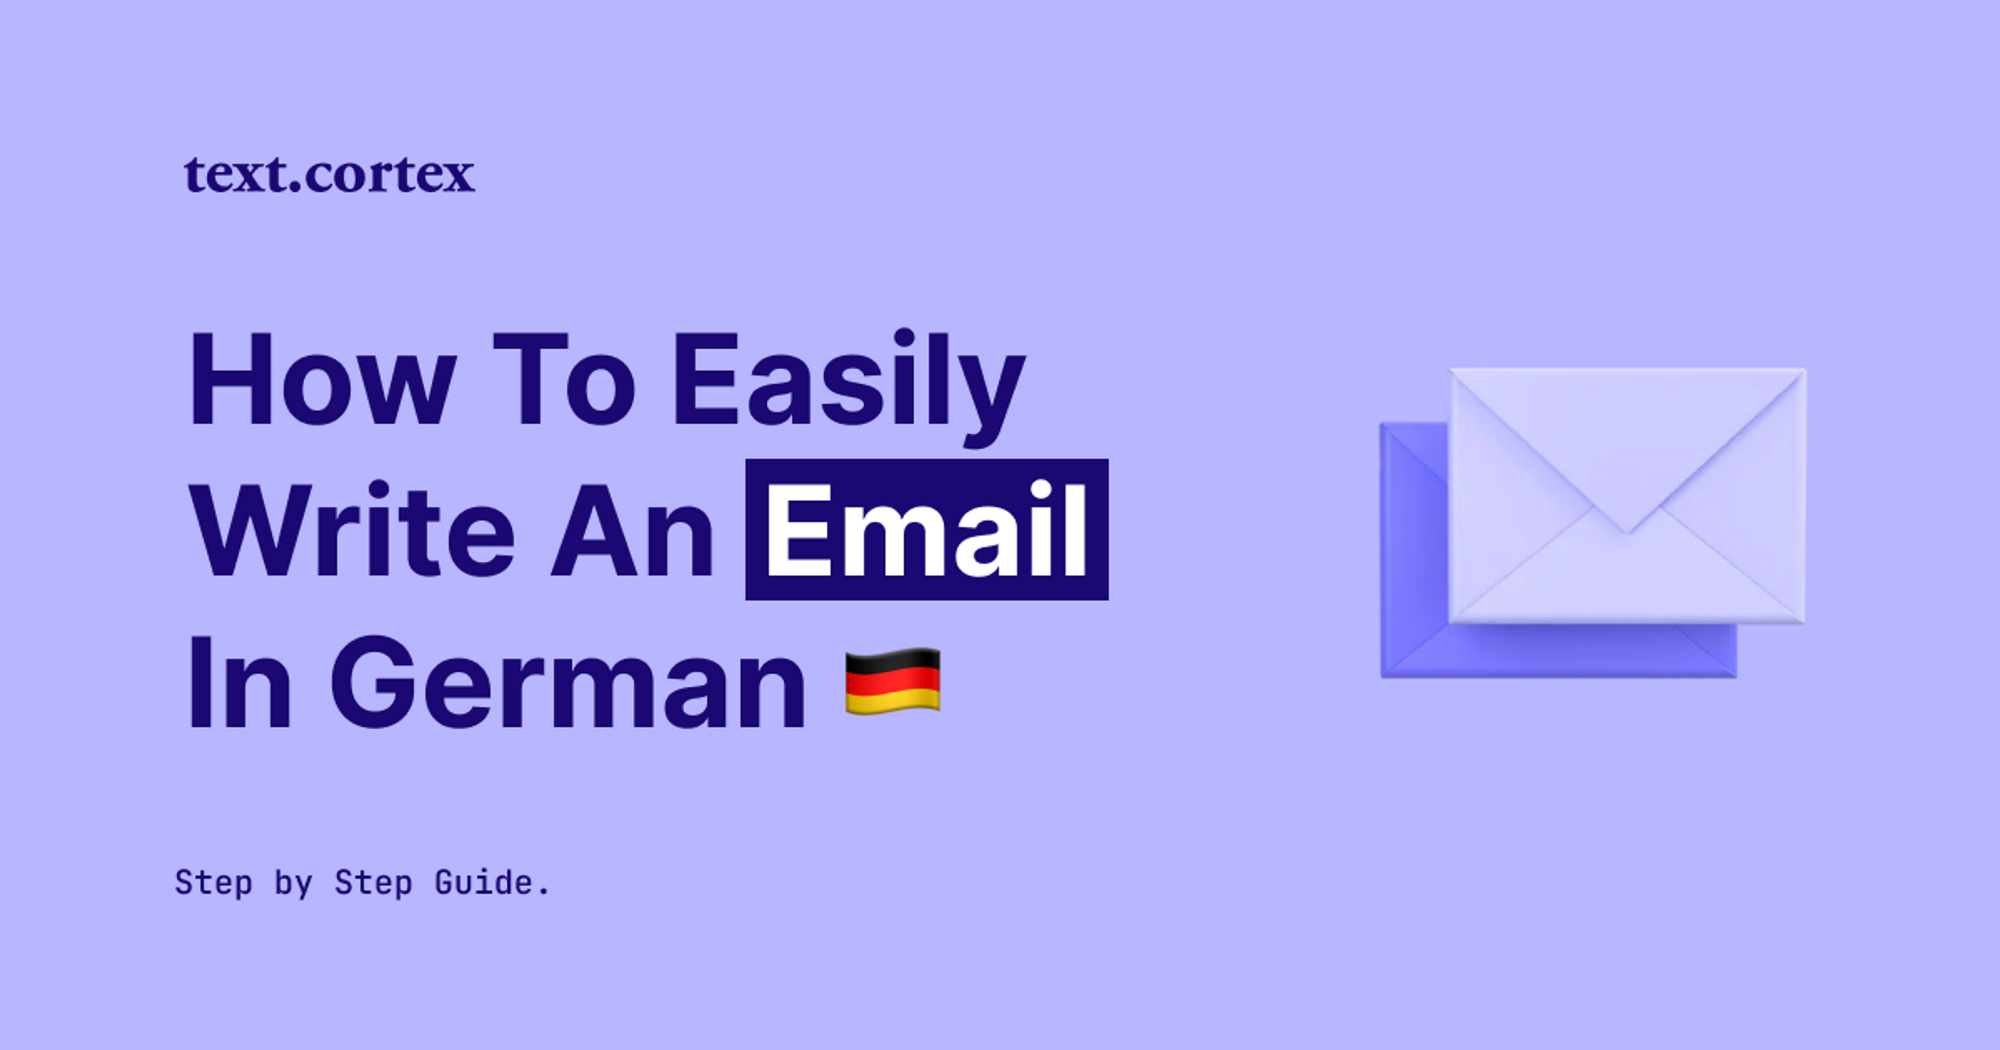 How to Easily Write an Email in German - Step-by-Step Guide